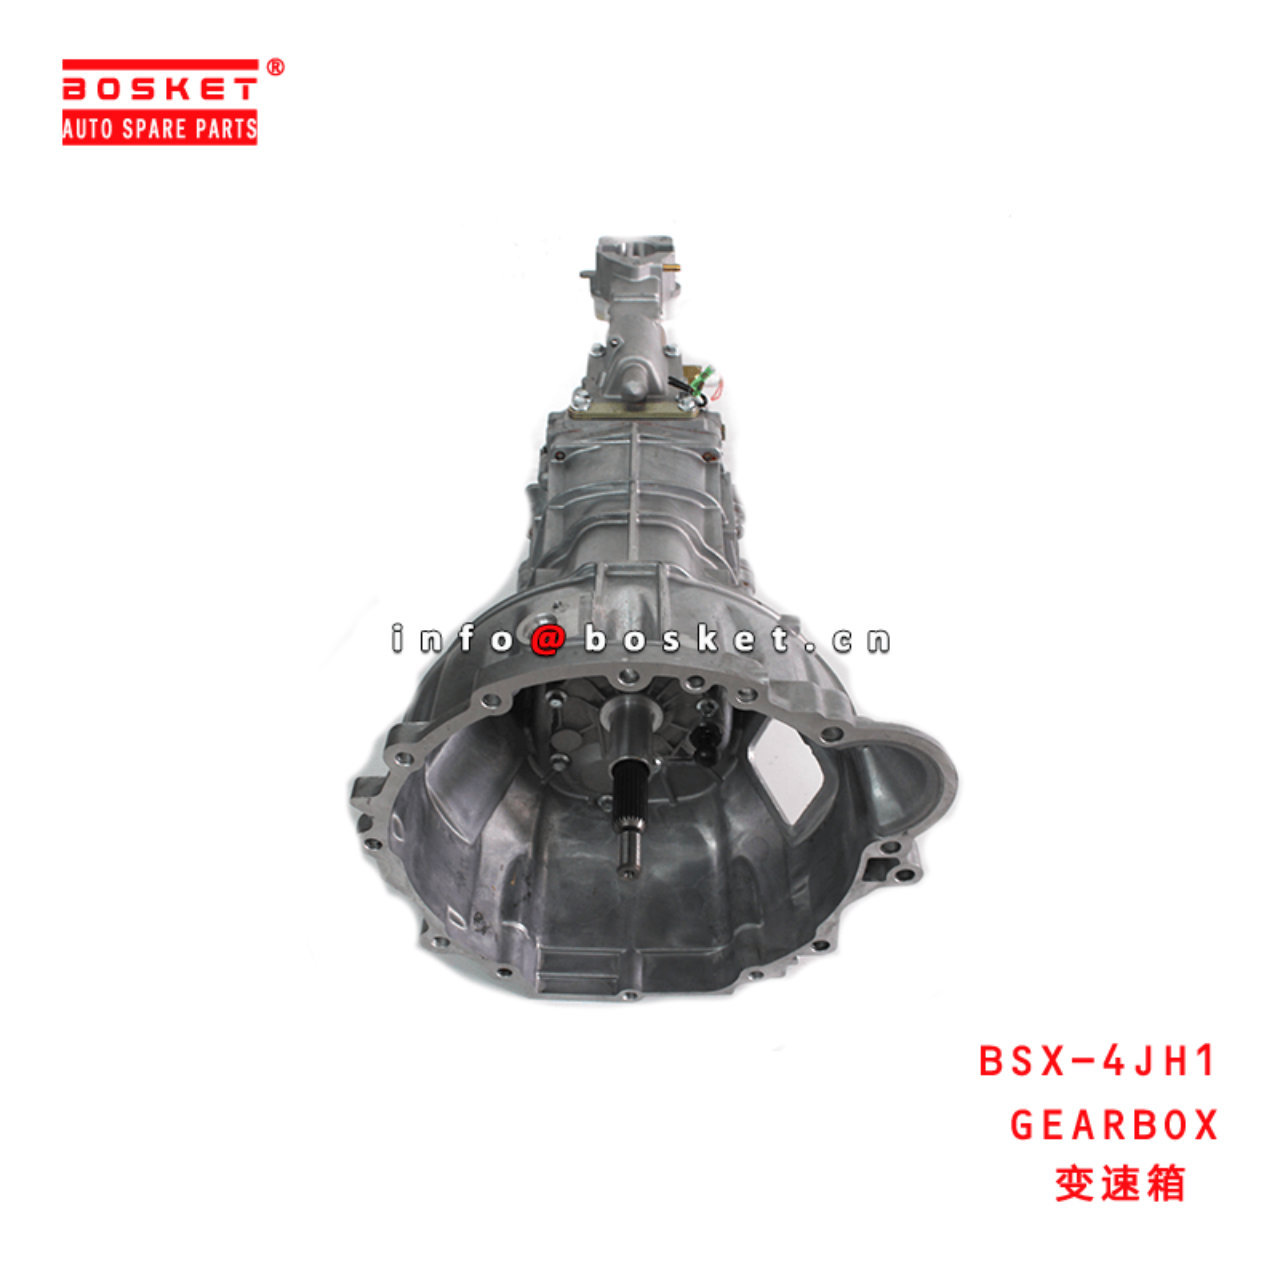 BSX-4JH1 Gearbox Suitable for ISUZU D-MAX 3.0 TFR-55 4X2 4JH1